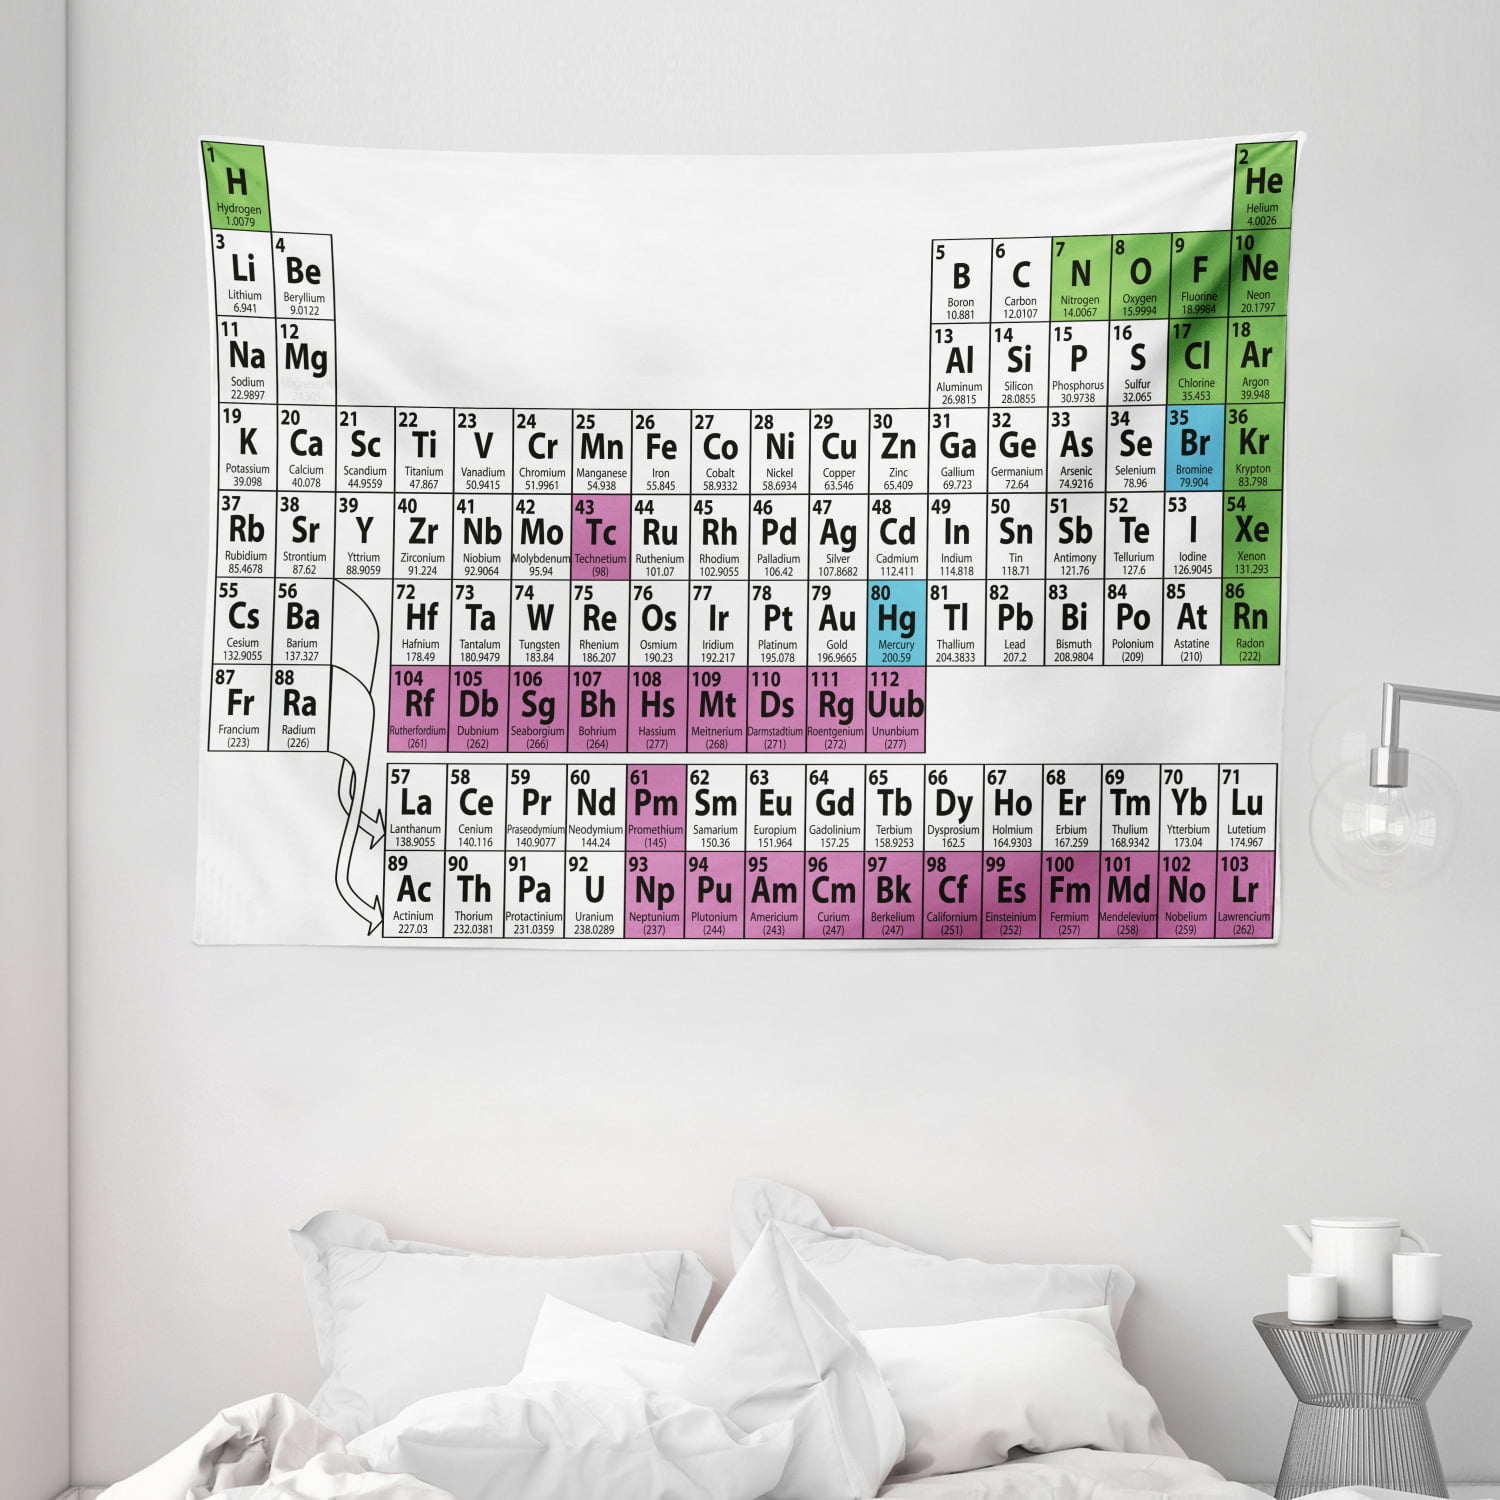 Small to Giant Sizes Periodic Table Tapestry Wall Hanging of Elements Science Scientist Tapestries Dorm Room Bedroom Decor Art Printed in the USA 